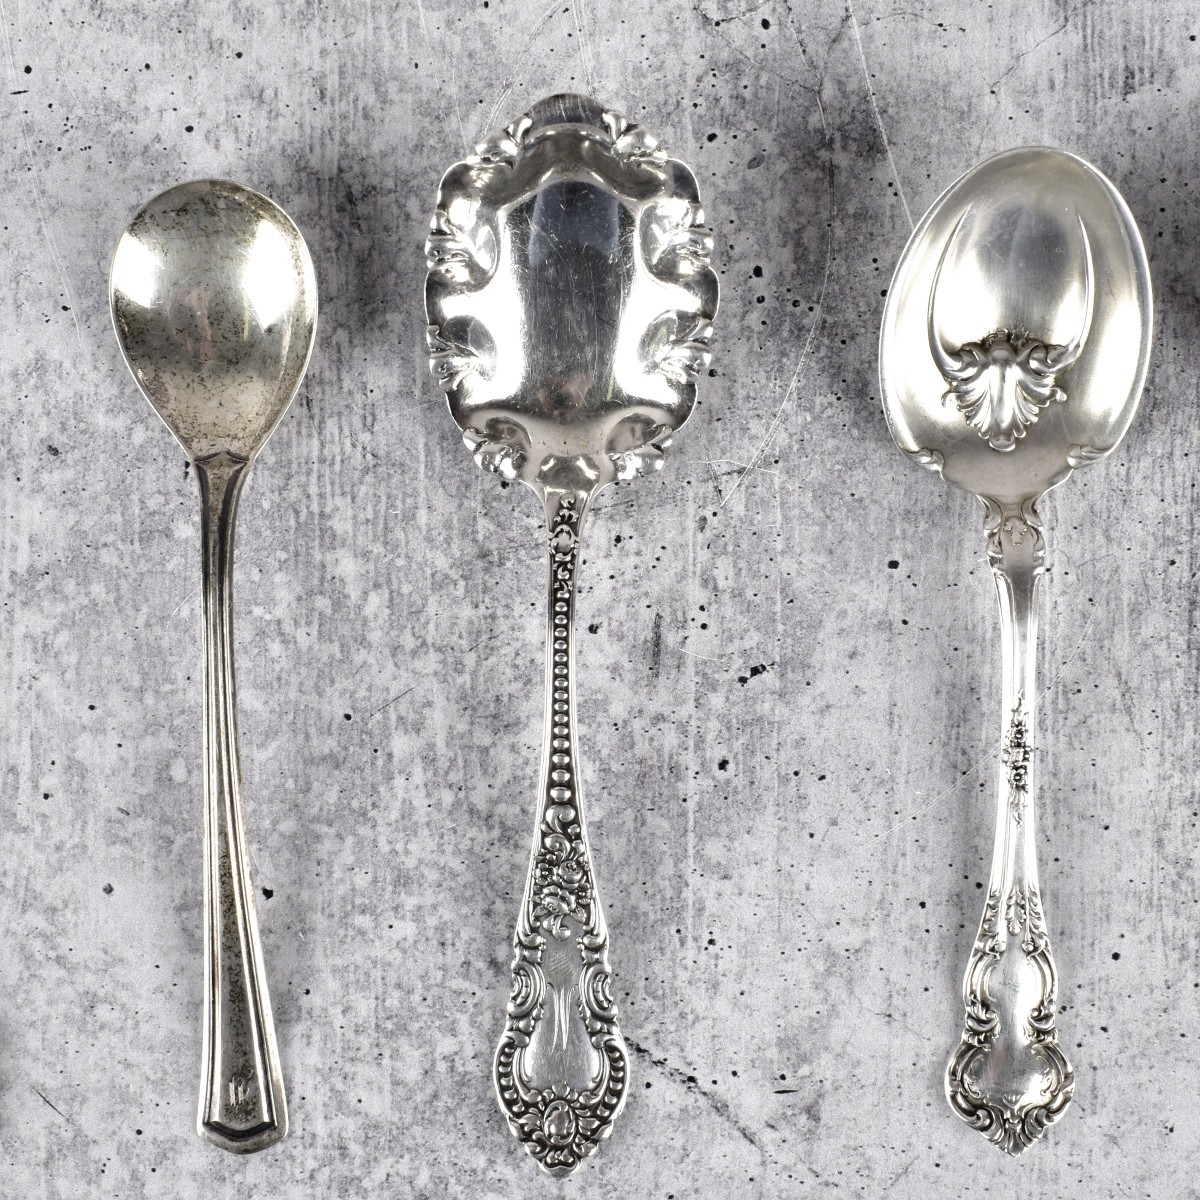 Antique and Vintage Silver Tableware